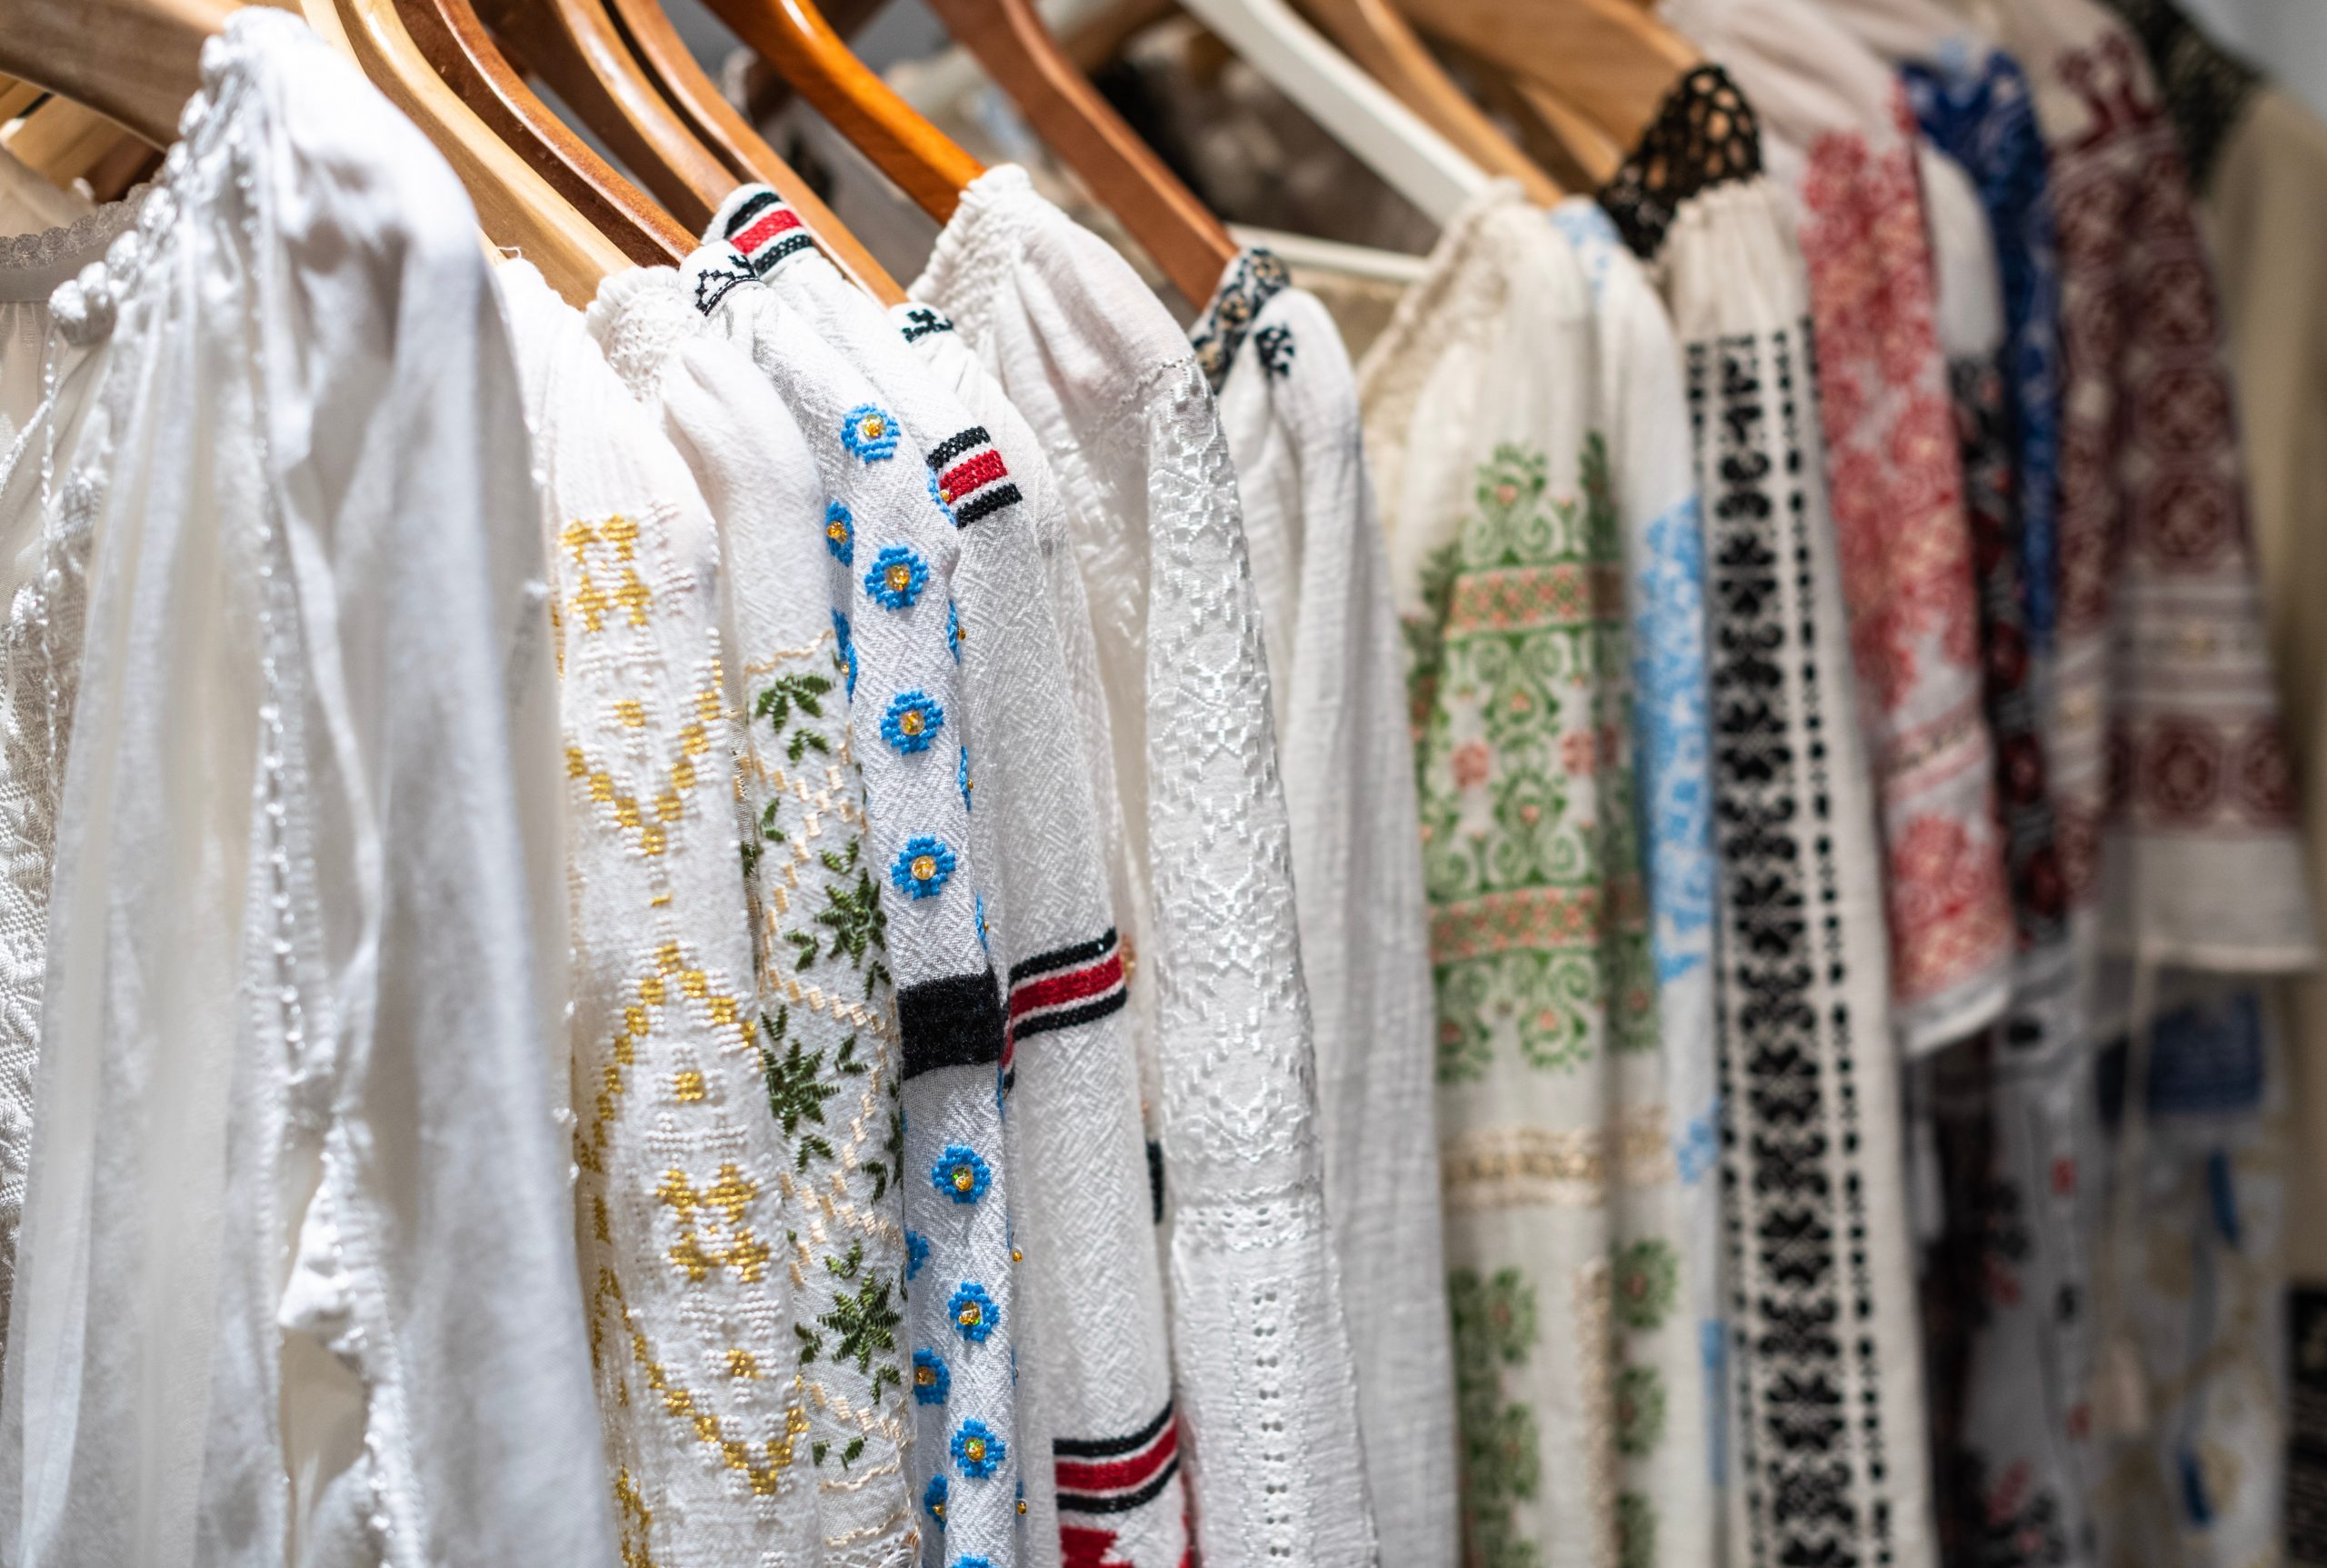 A set of traditional Romanian blouses called Ie - perfect for an authentic Romanian souvenir